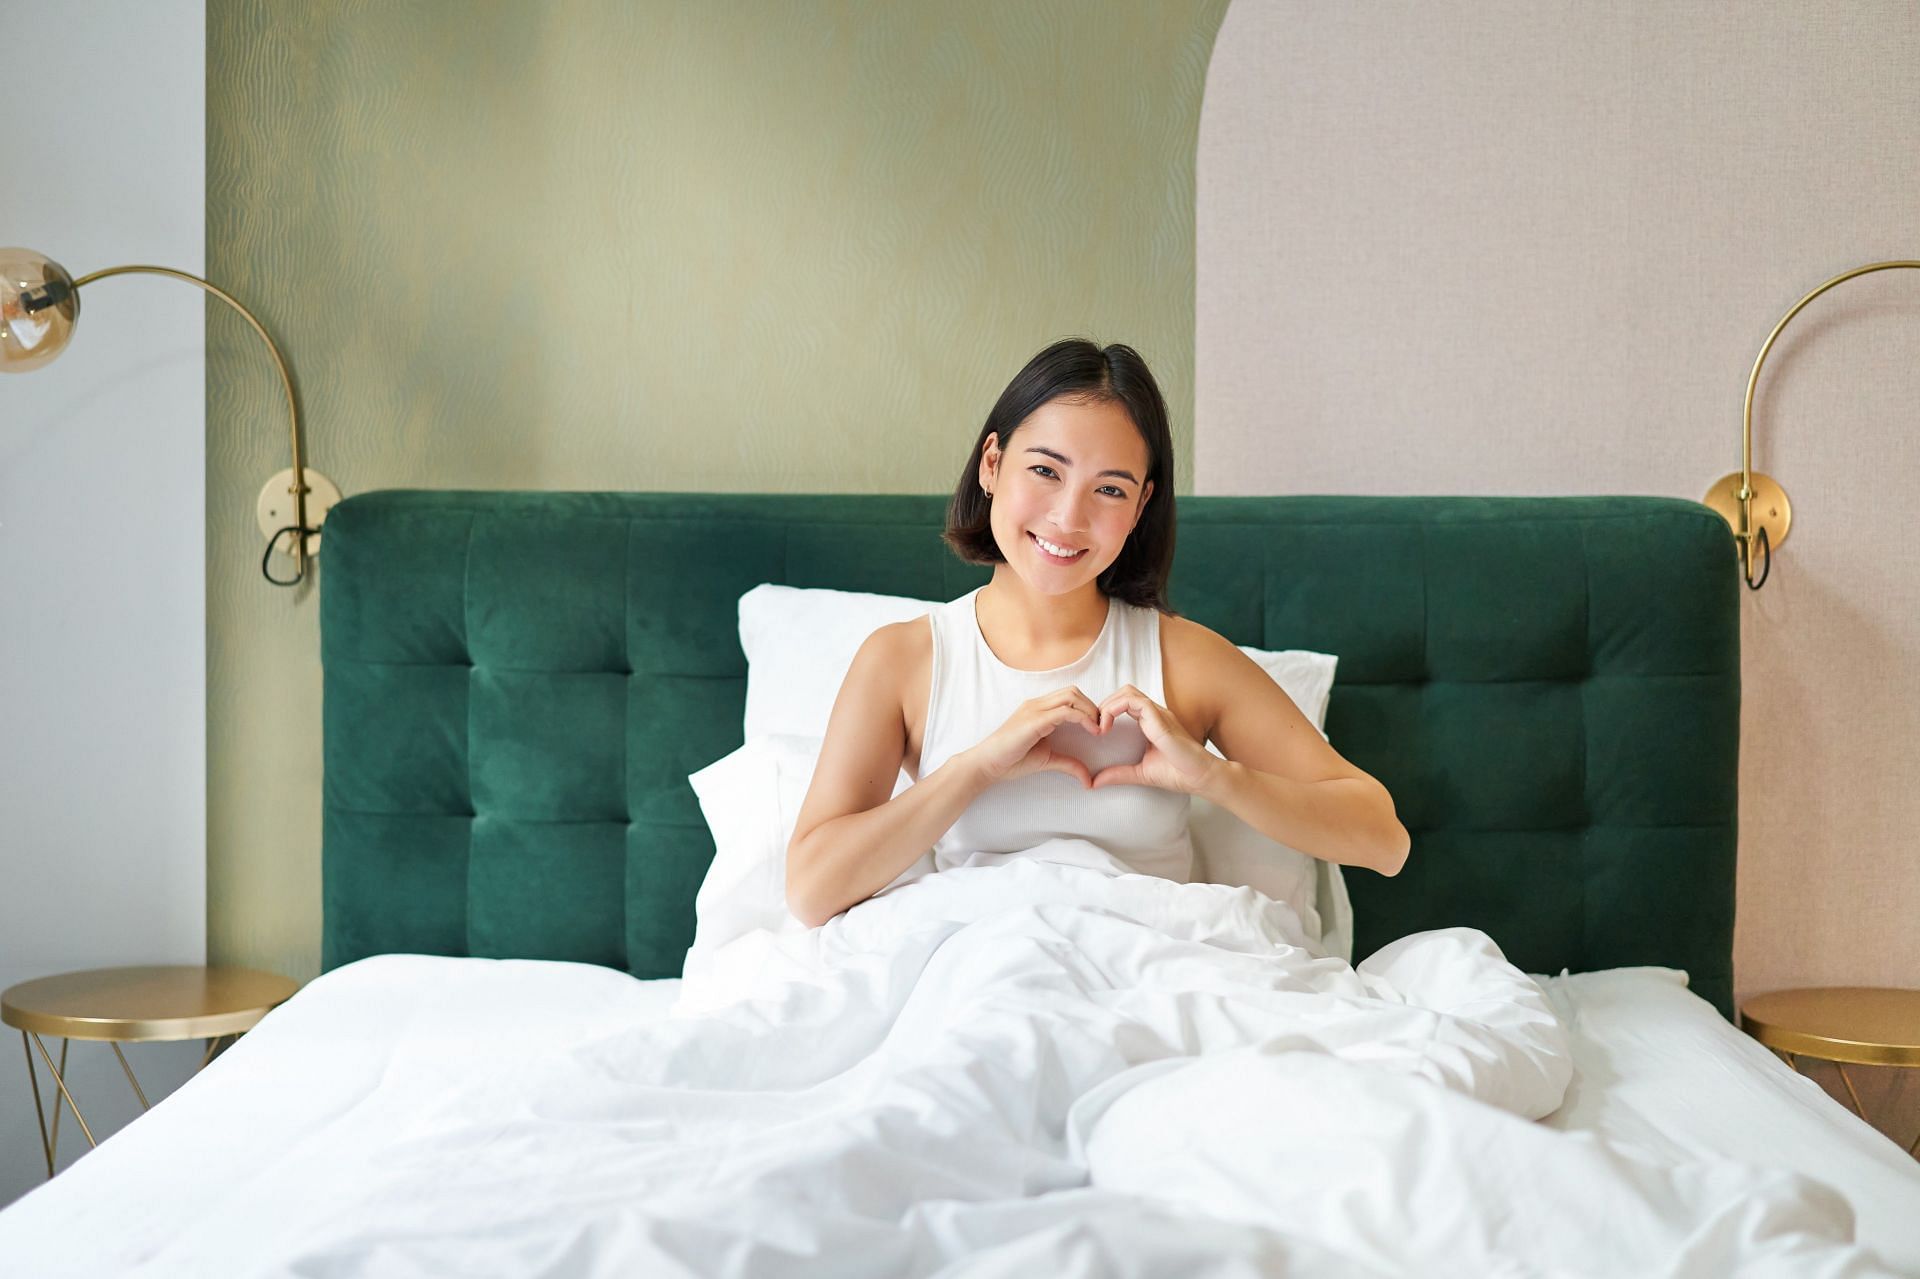 Here is how making your bed every morning is linked to better returns on your health. (Image via Vecteezy/ Mix and Match Studio)